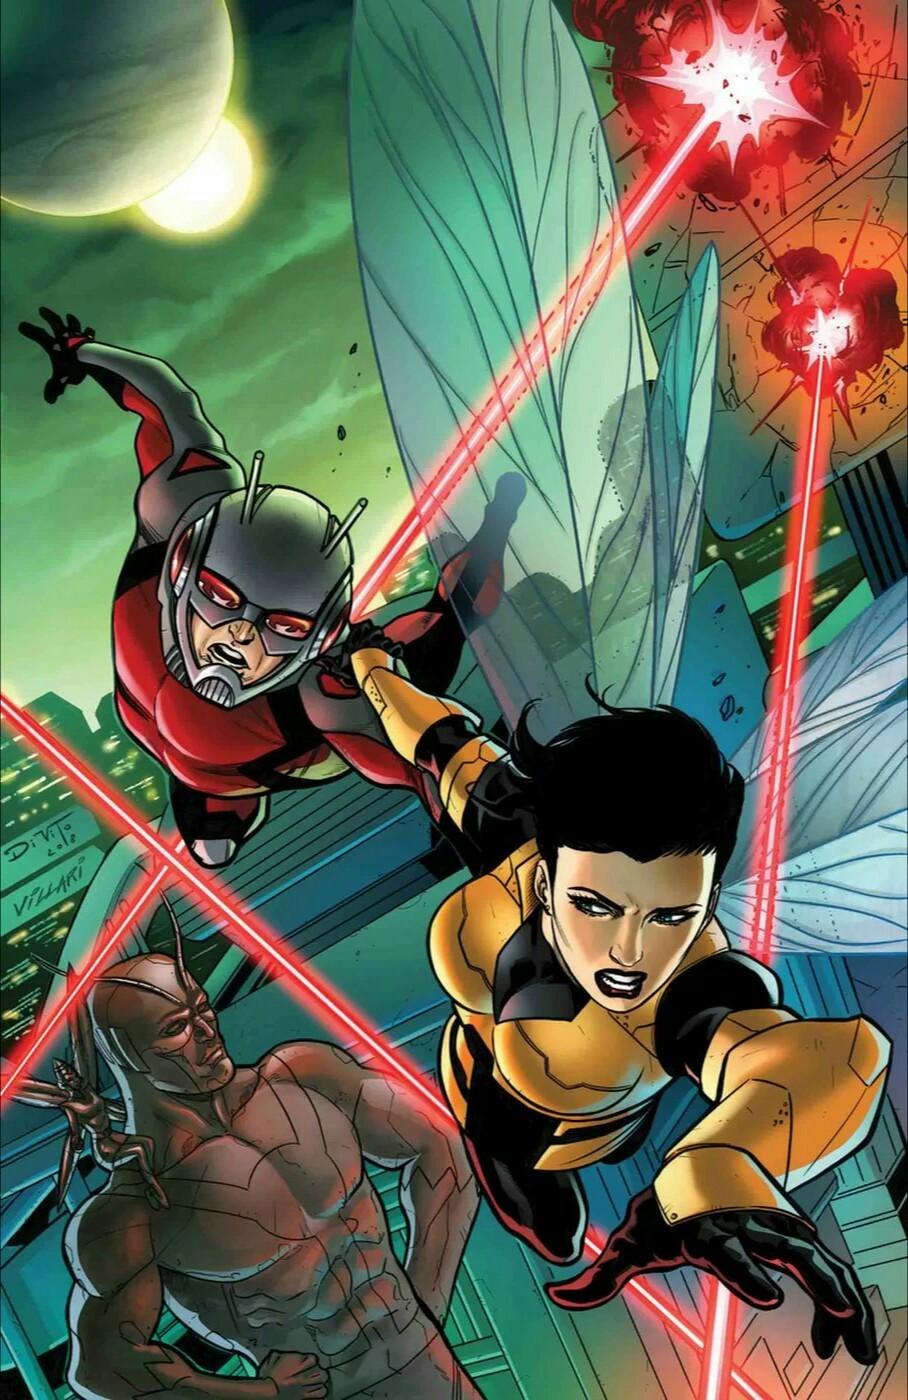 Ant-Man and the Wasp: Living Legends Vol. 1 #1